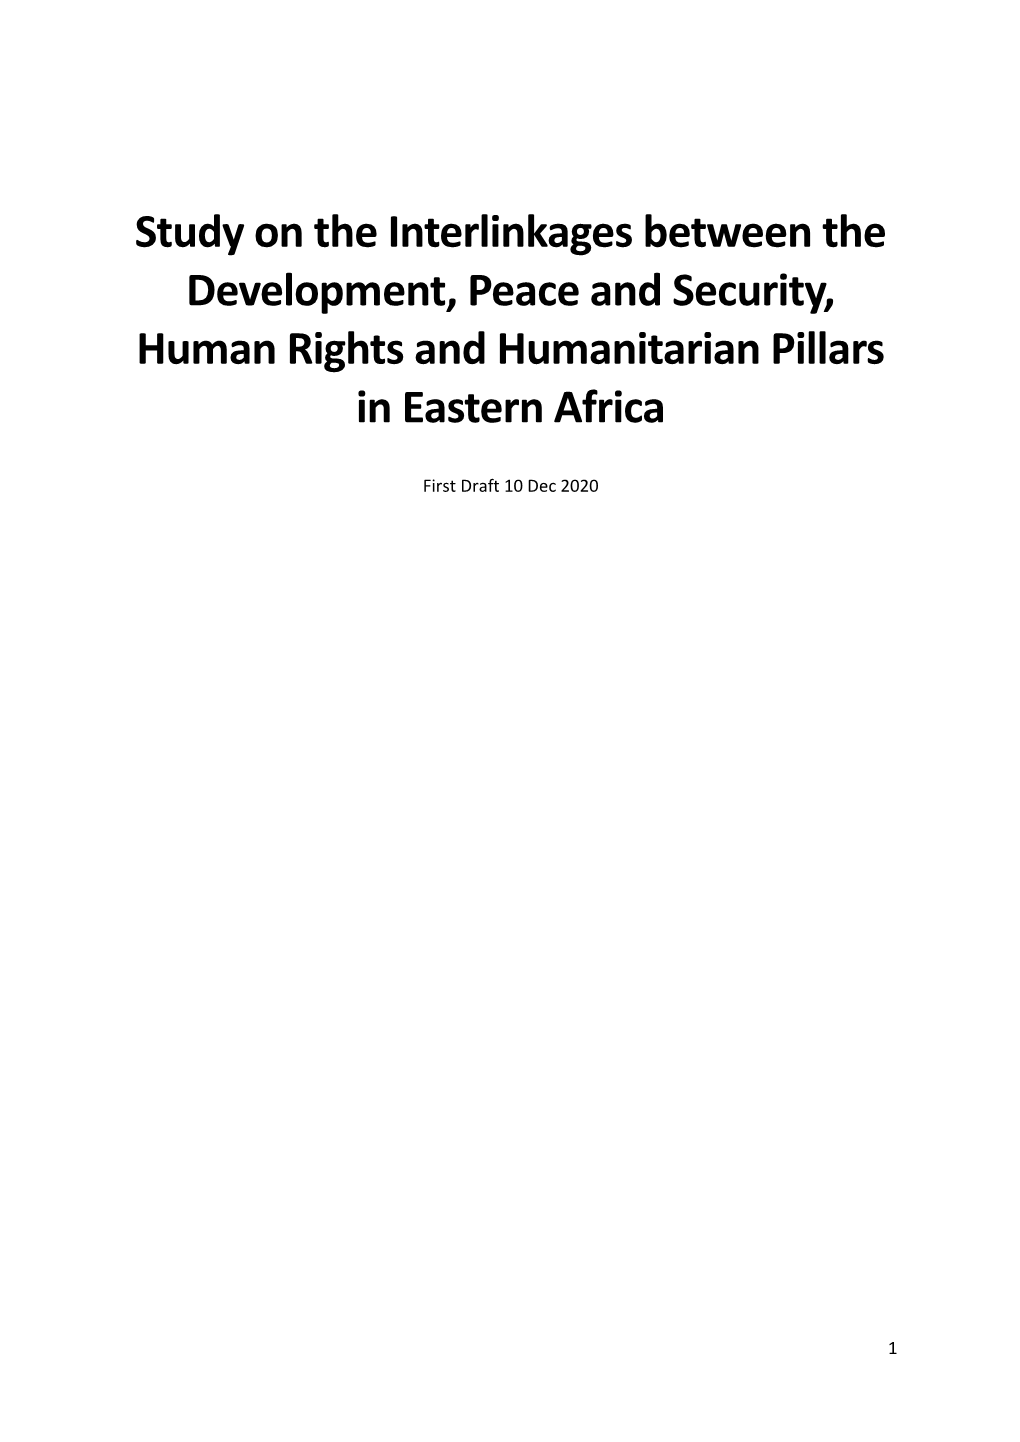 Study on the Interlinkages Between the Development, Peace and Security, Human Rights and Humanitarian Pillars in Eastern Africa